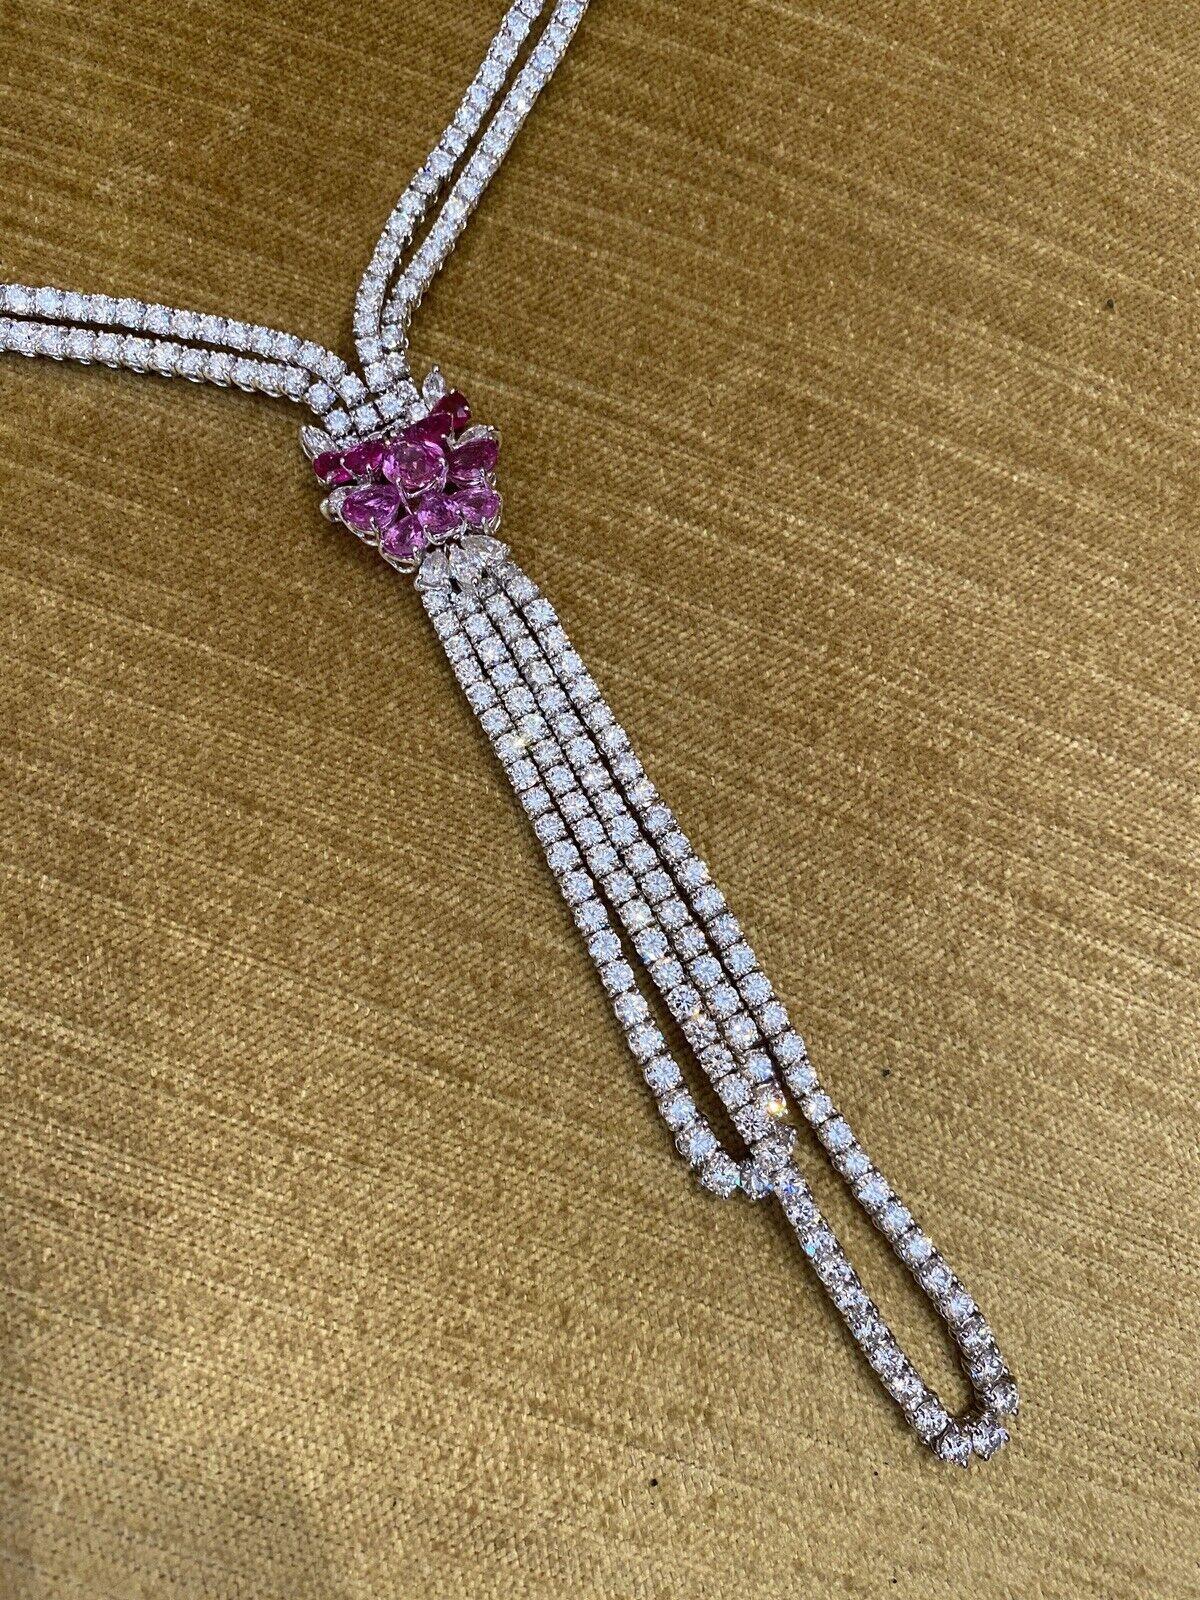 Women's Stefan Hafner Y Diamond Necklace with Pink Sapphires in 18k White Gold For Sale